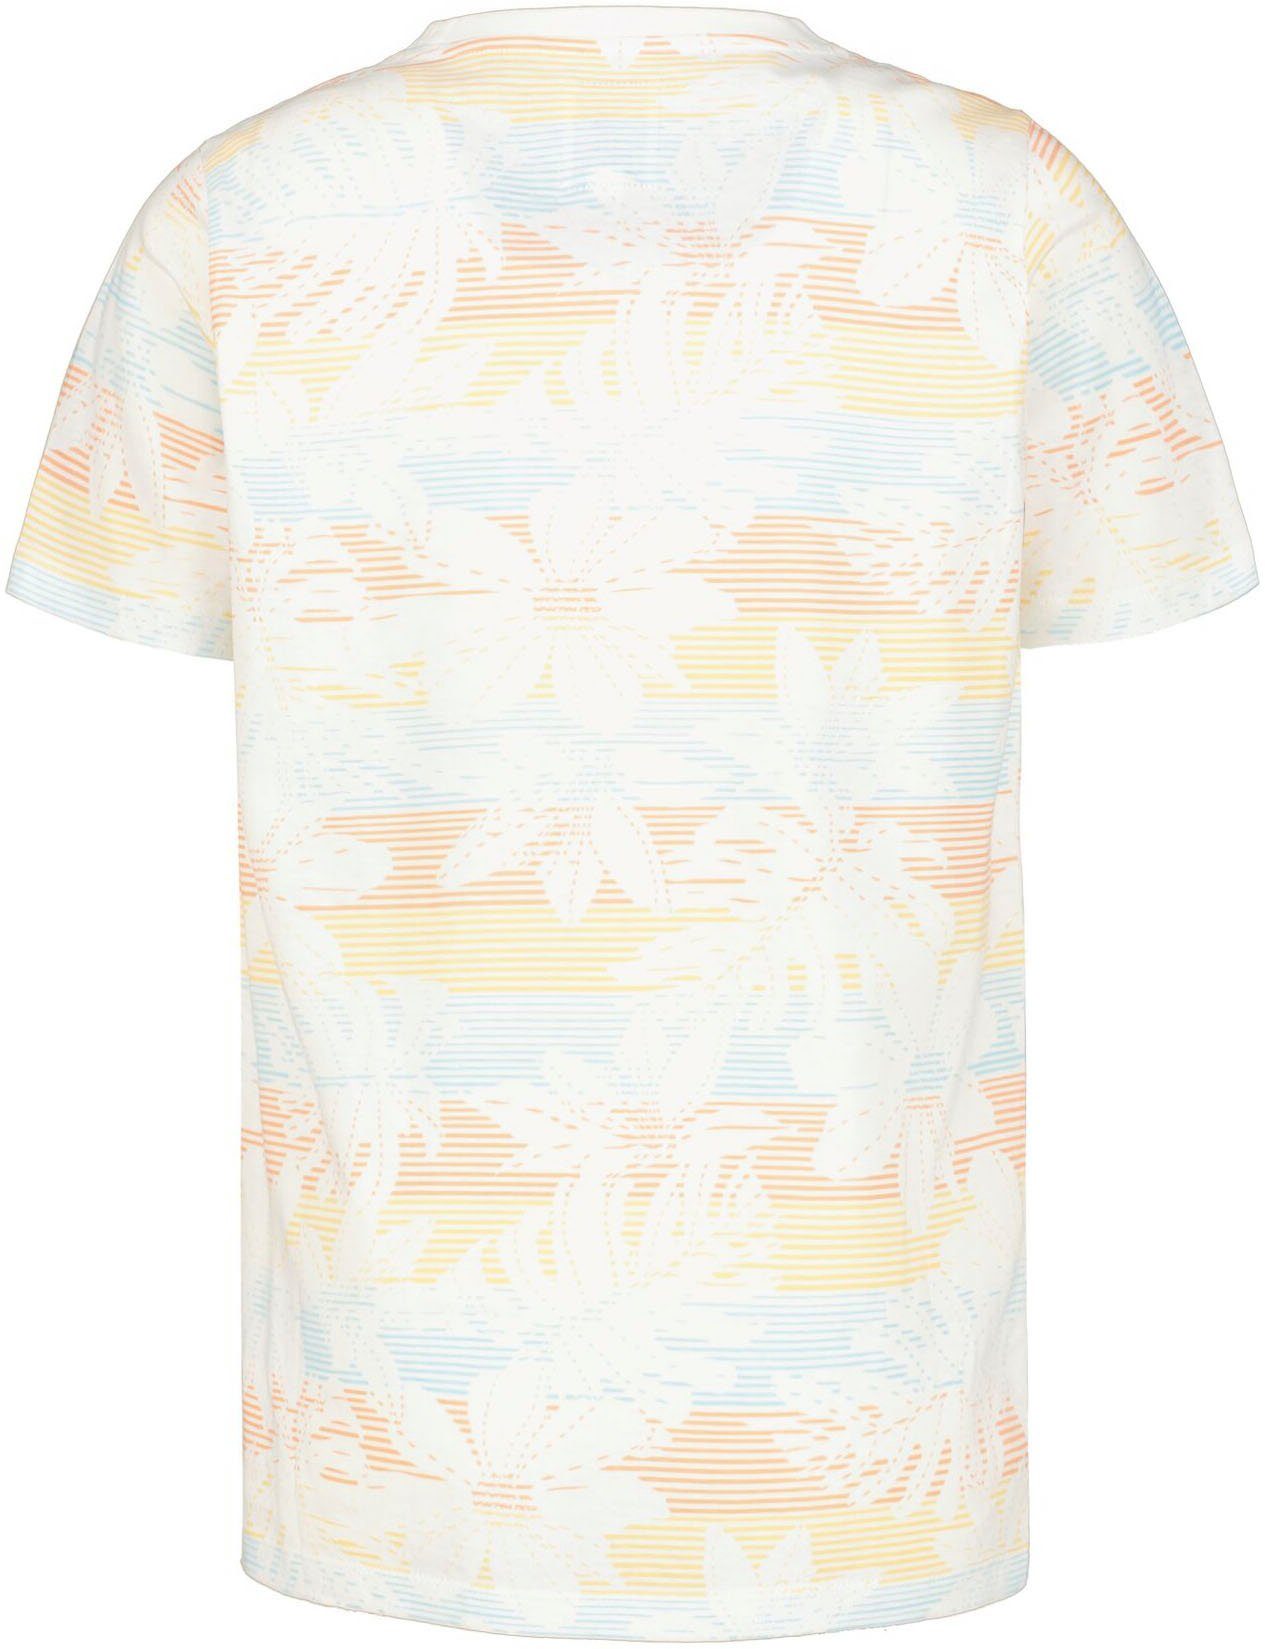 for BOYS Garcia T-Shirt Allovermuster, floralem mit offwhite